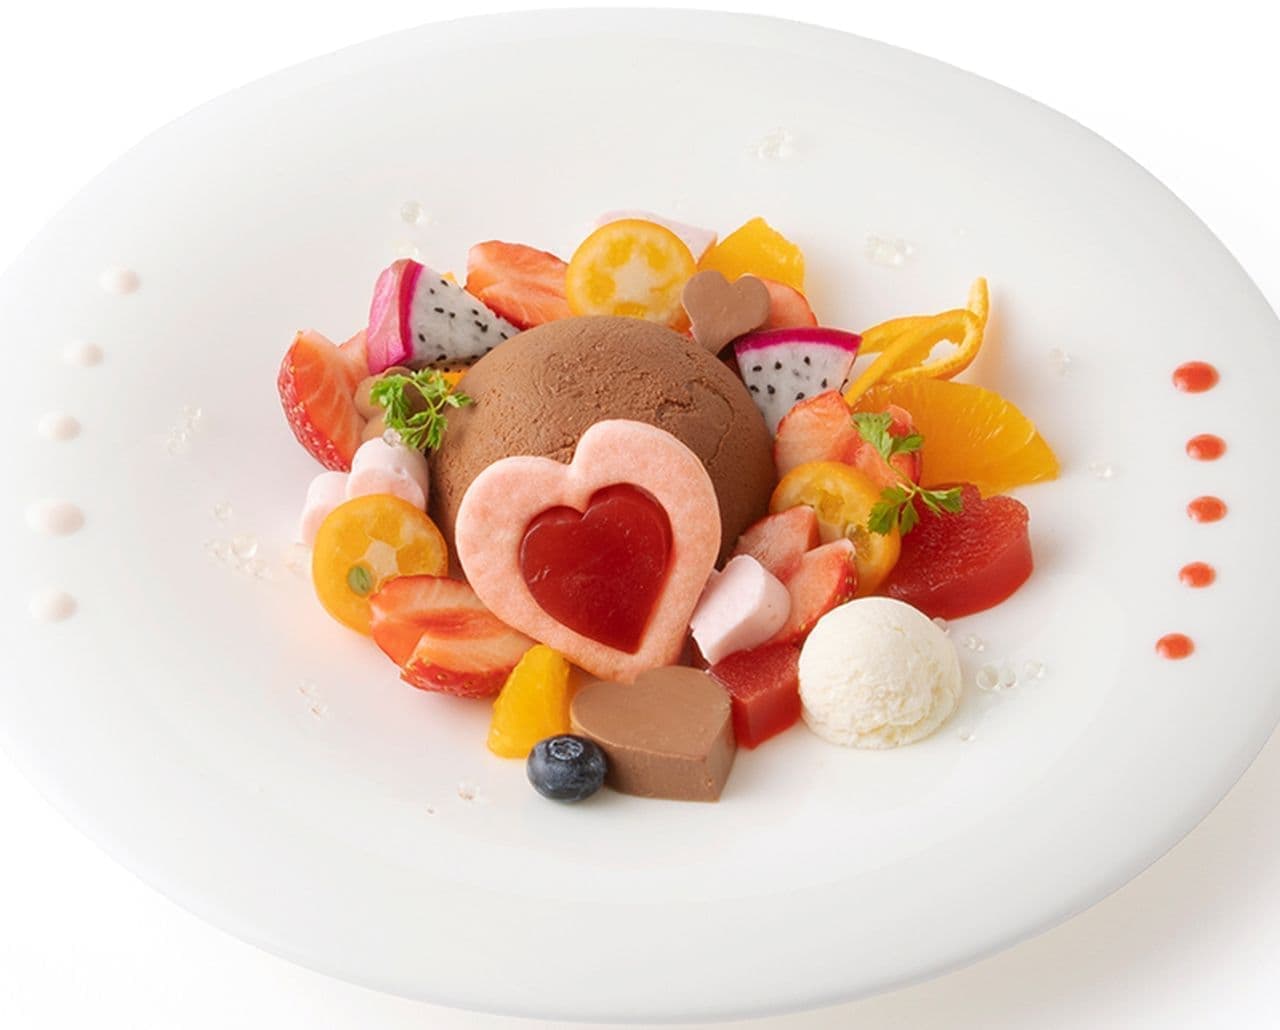 Valentine Parfait" and "Valentine Plate" at Kano Fruit Parlor